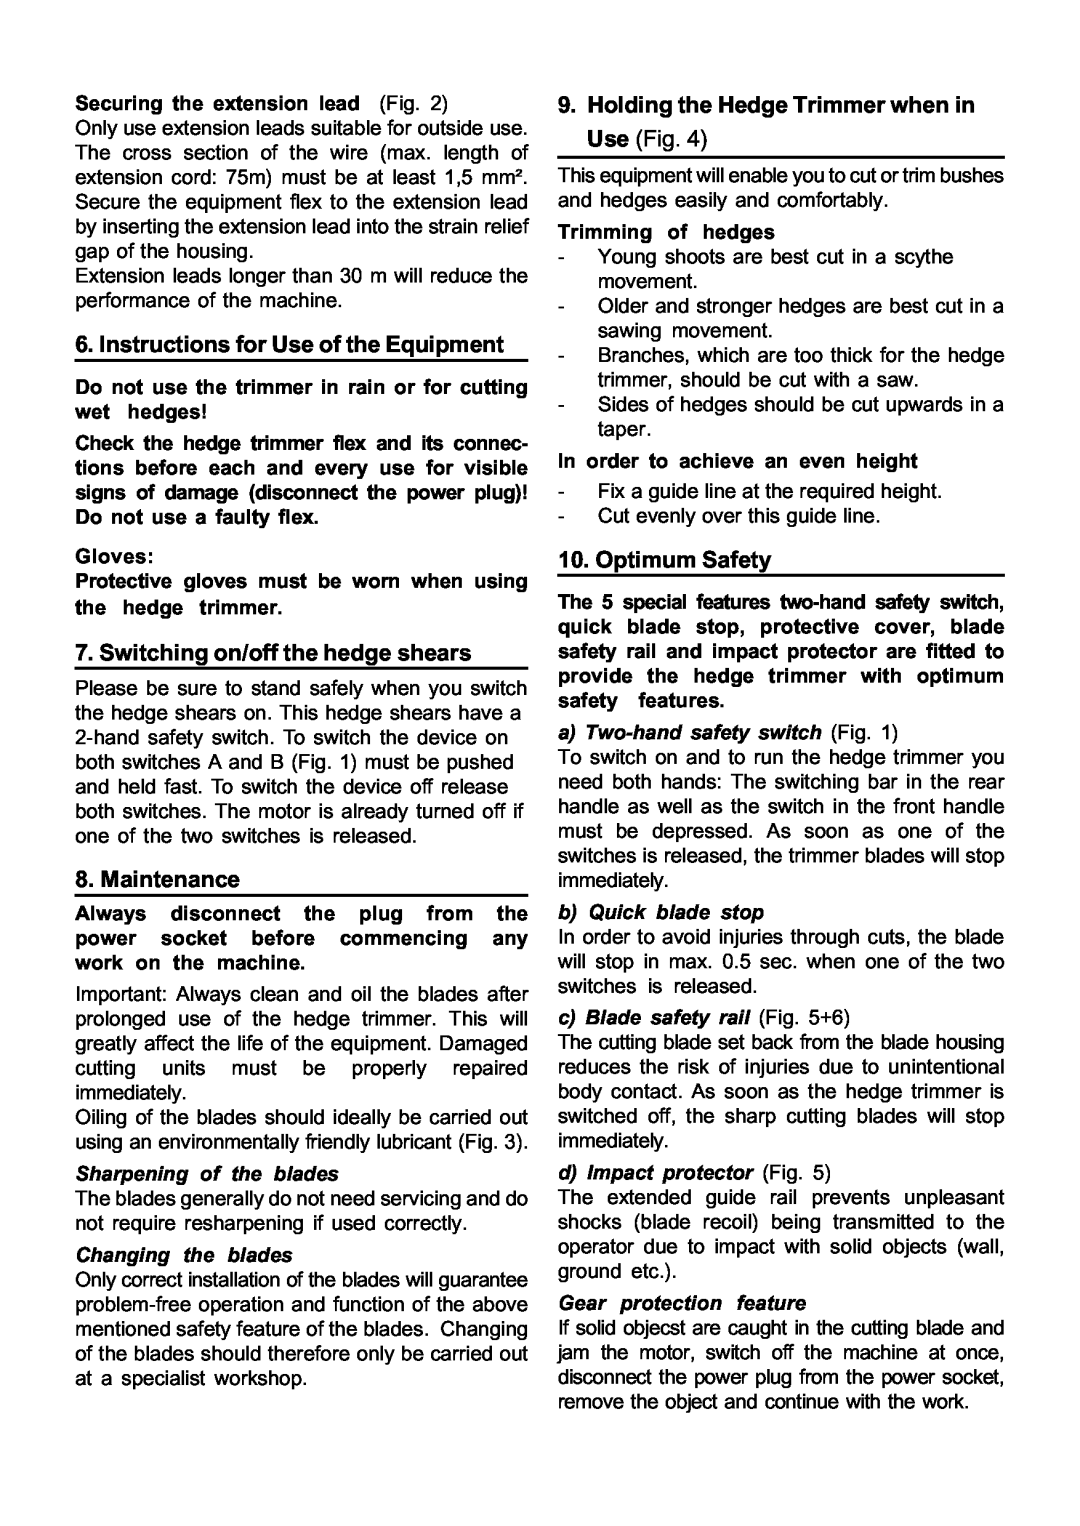 Stiga SH 56 manual Instructions for Use of the Equipment, Switching on/off the hedge shears, Maintenance, Optimum Safety 